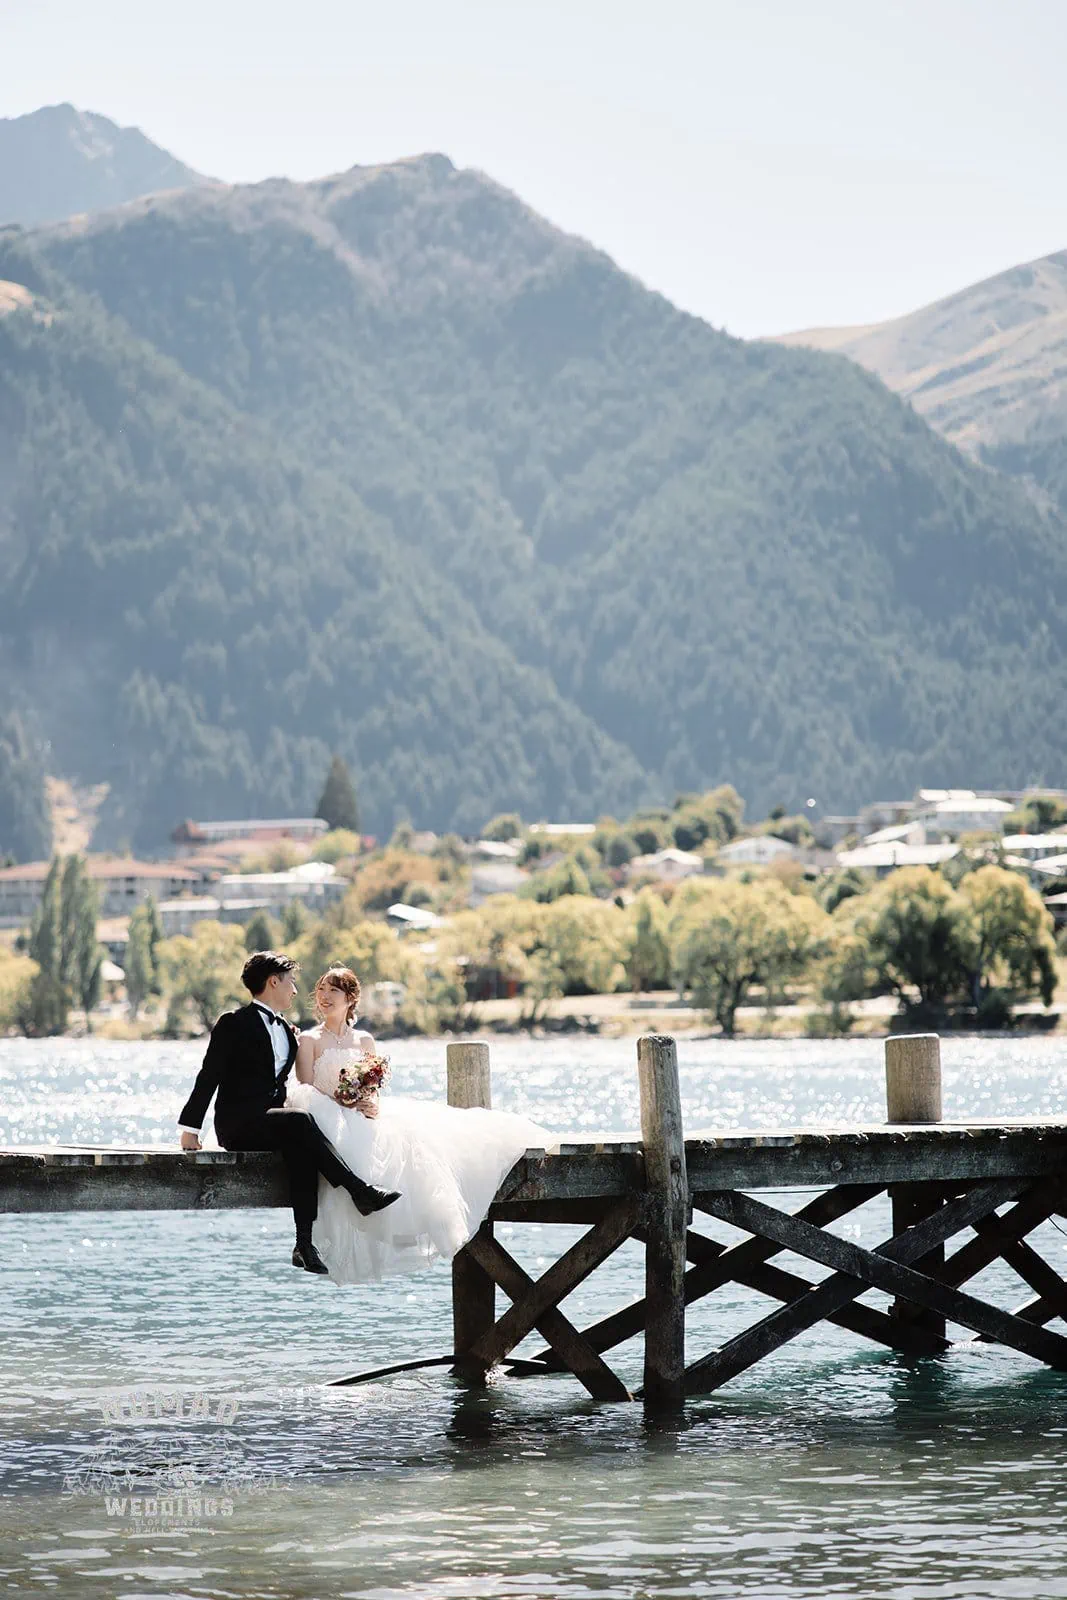 Queenstown New Zealand Elopement Wedding Photographer - A bride and groom sitting on a dock with mountains in the background, showcasing the summer season in Queenstown.